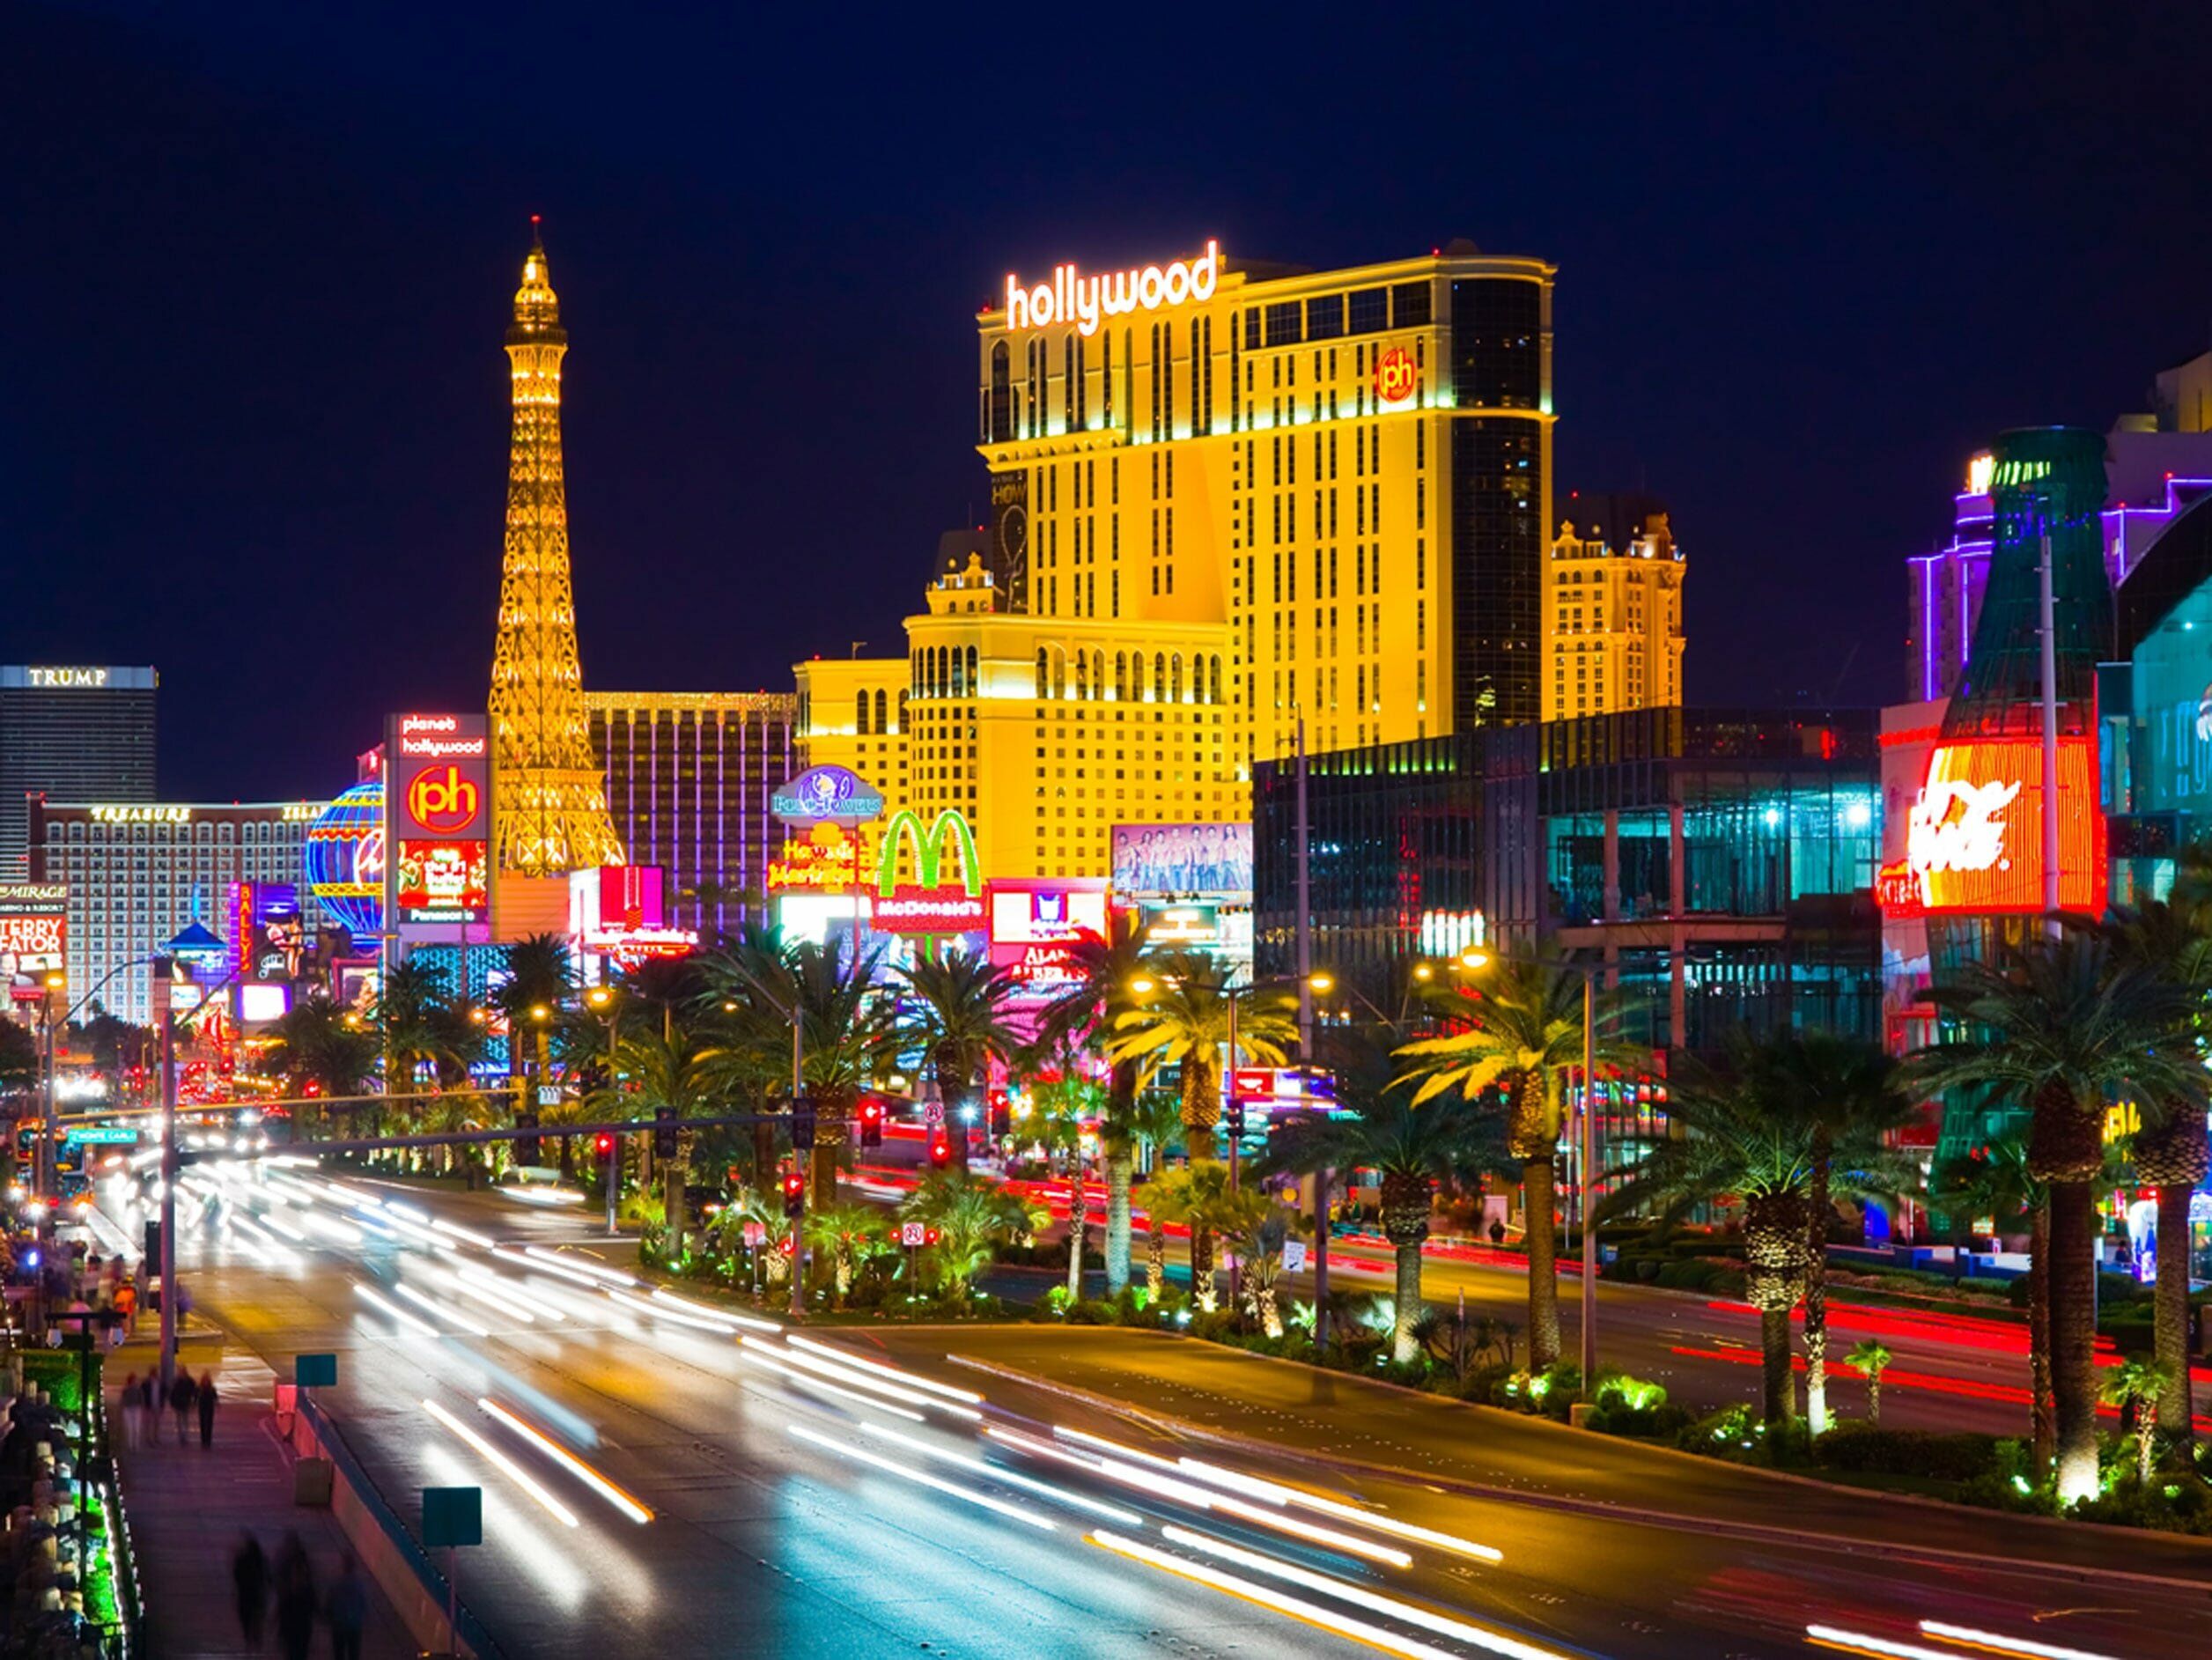 The Las Vegas Strip is one of the most famous and most visited tourist destinations in the world. - Las Vegas